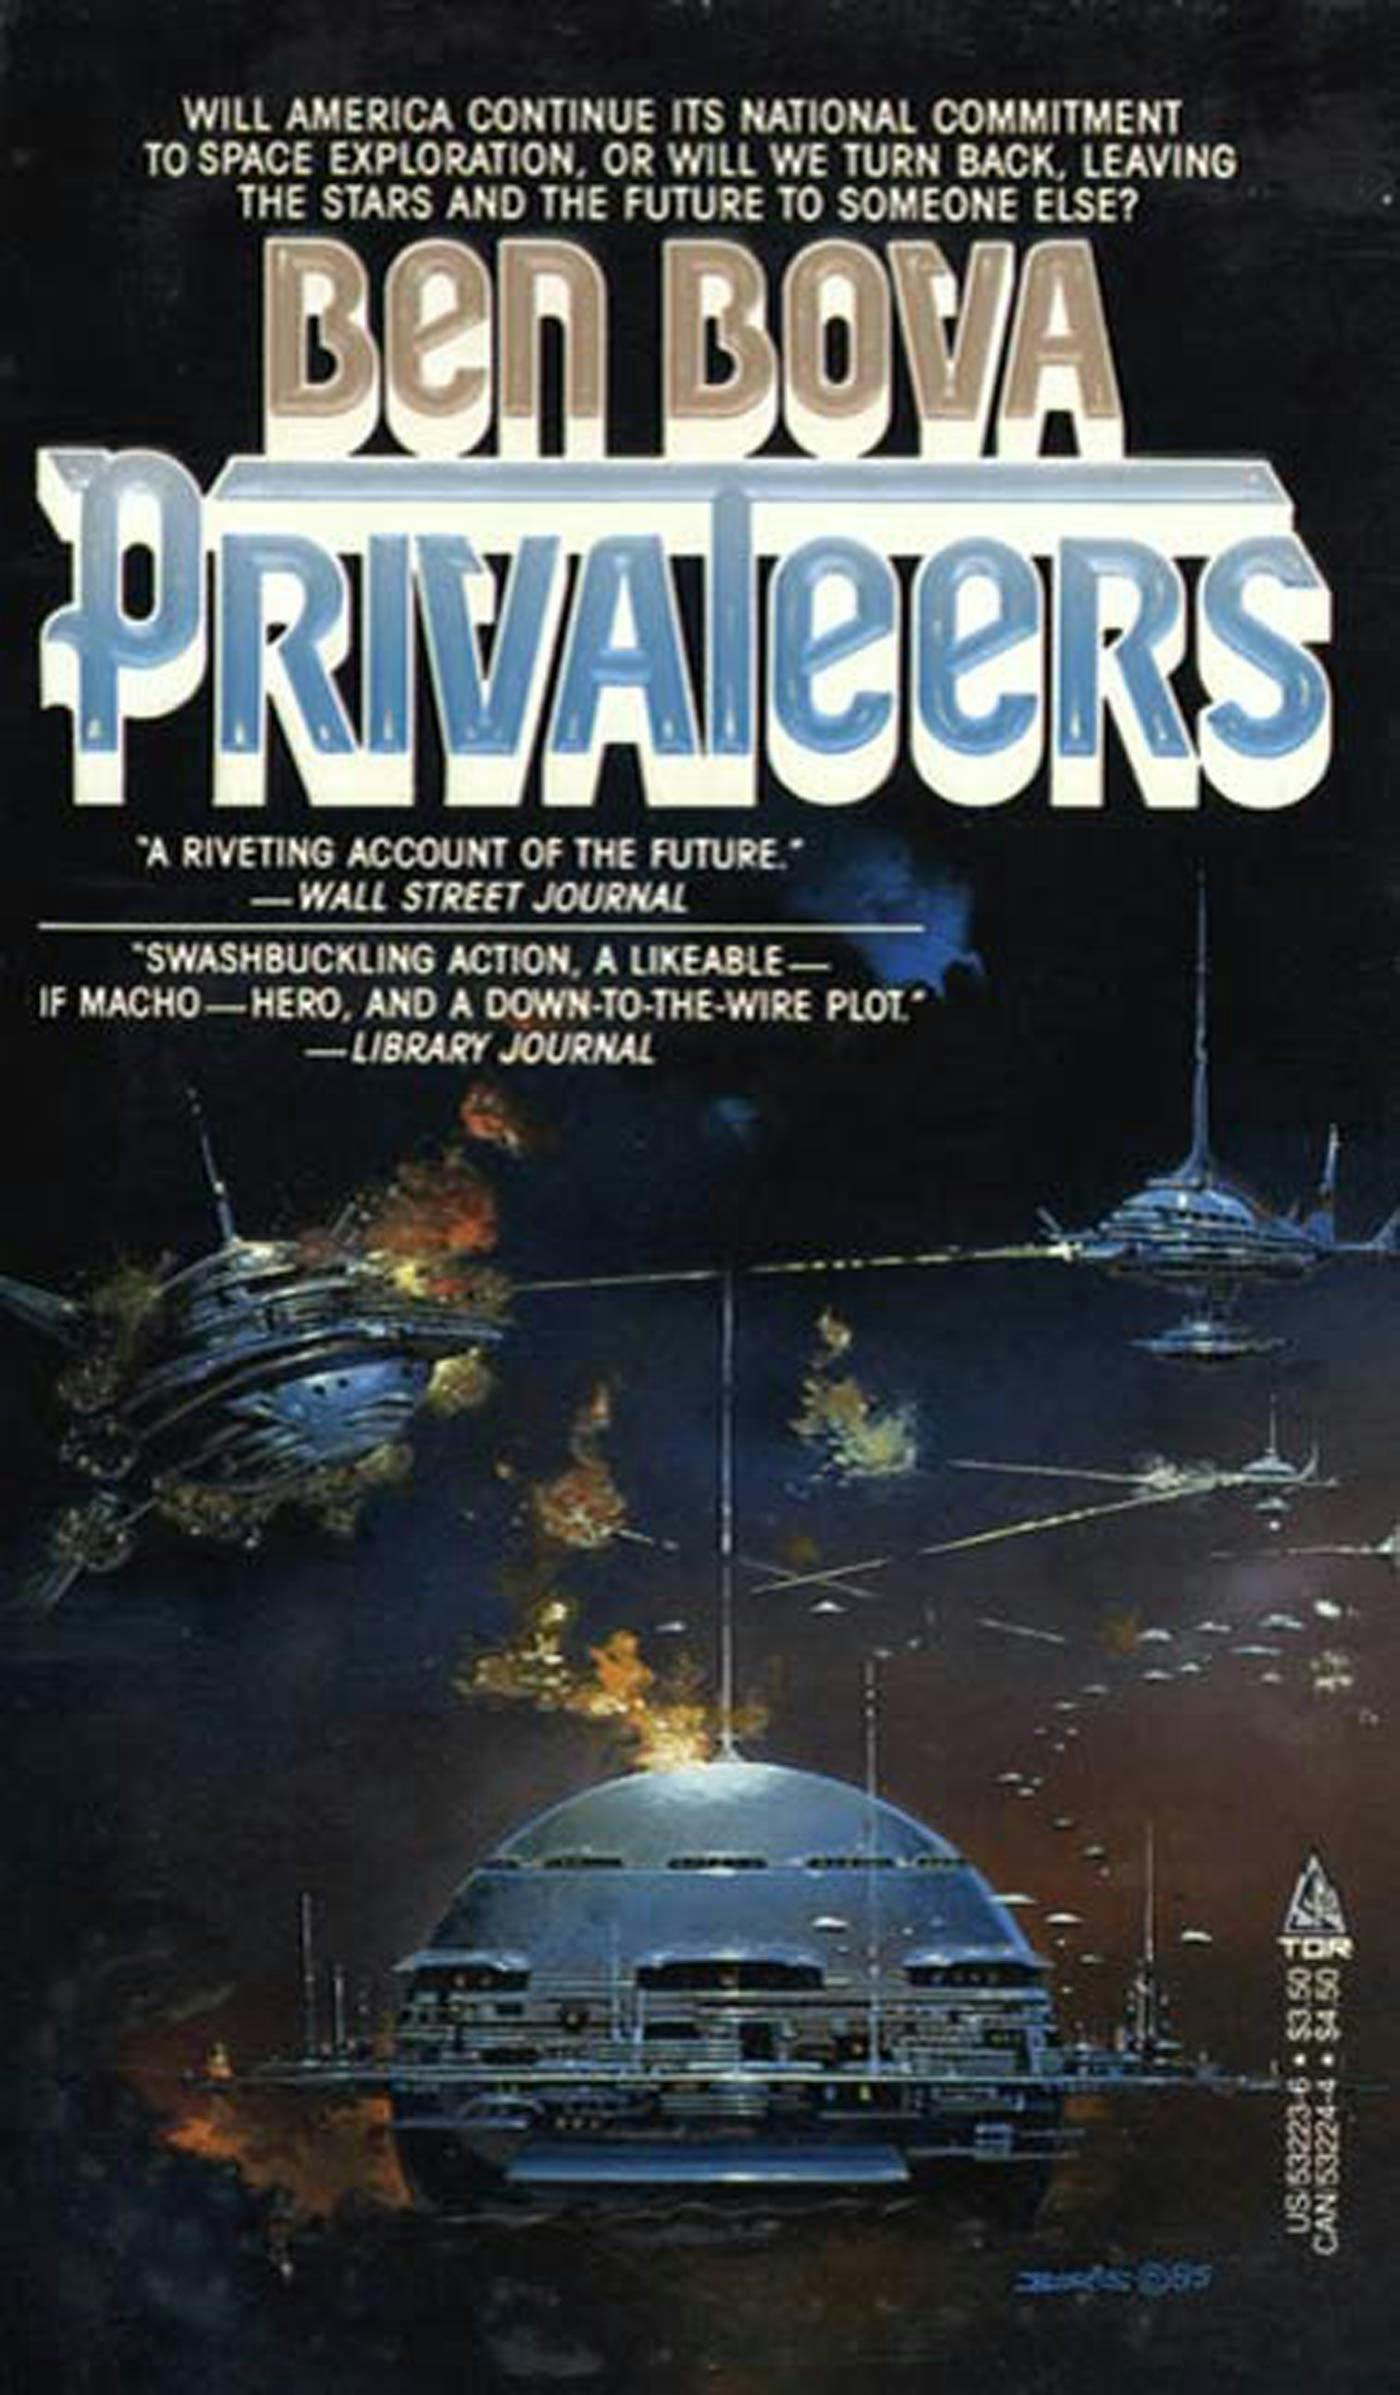 Image of Privateers